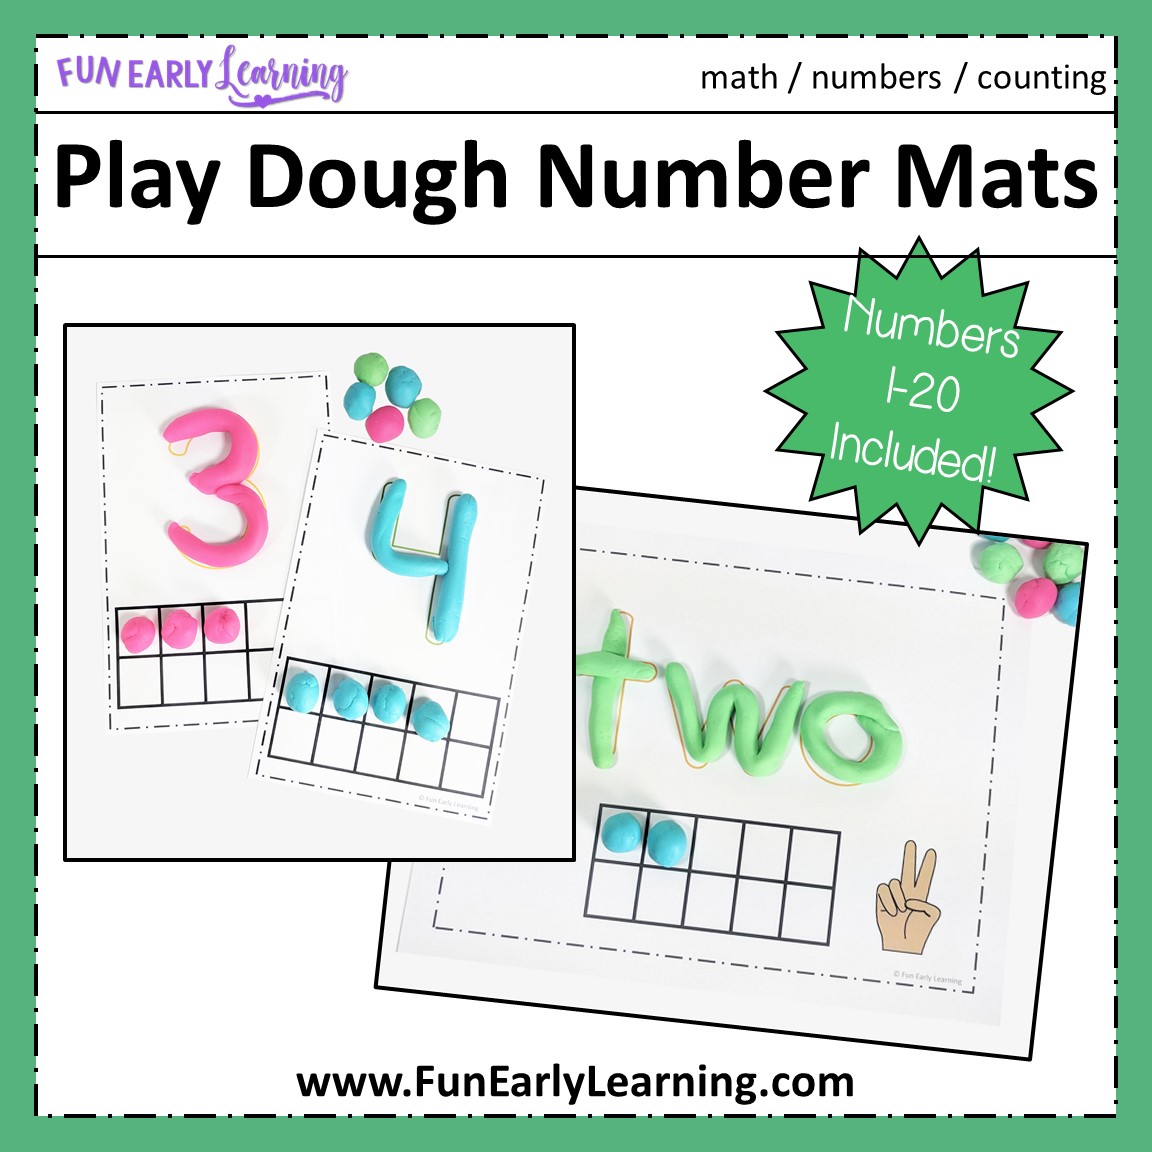 play-dough-number-mats-for-numbers-1-20-early-math-activity